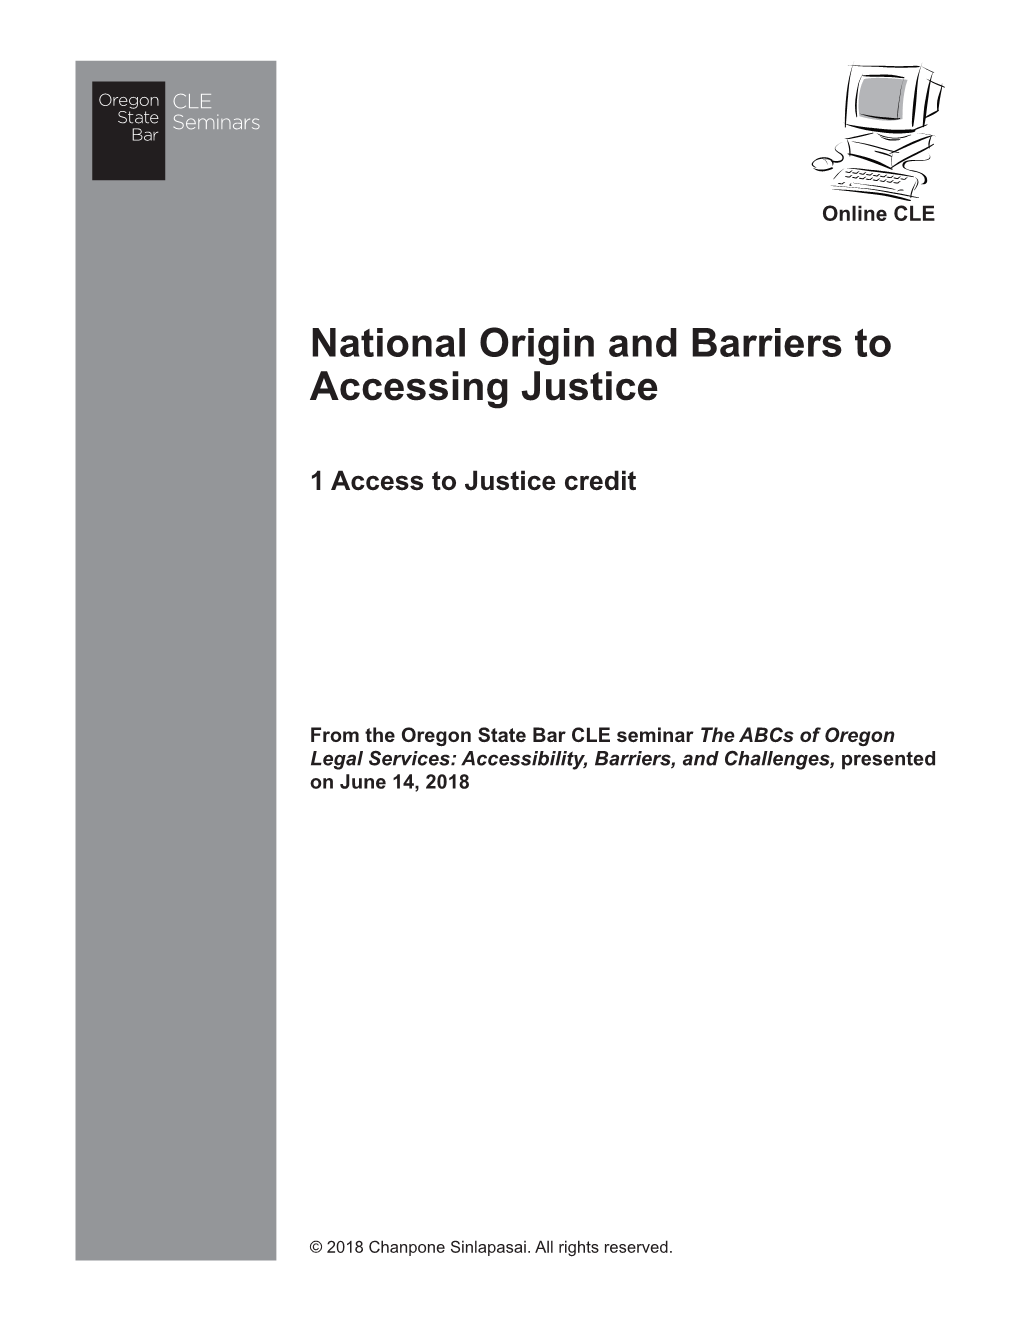 National Origin and Barriers to Accessing Justice